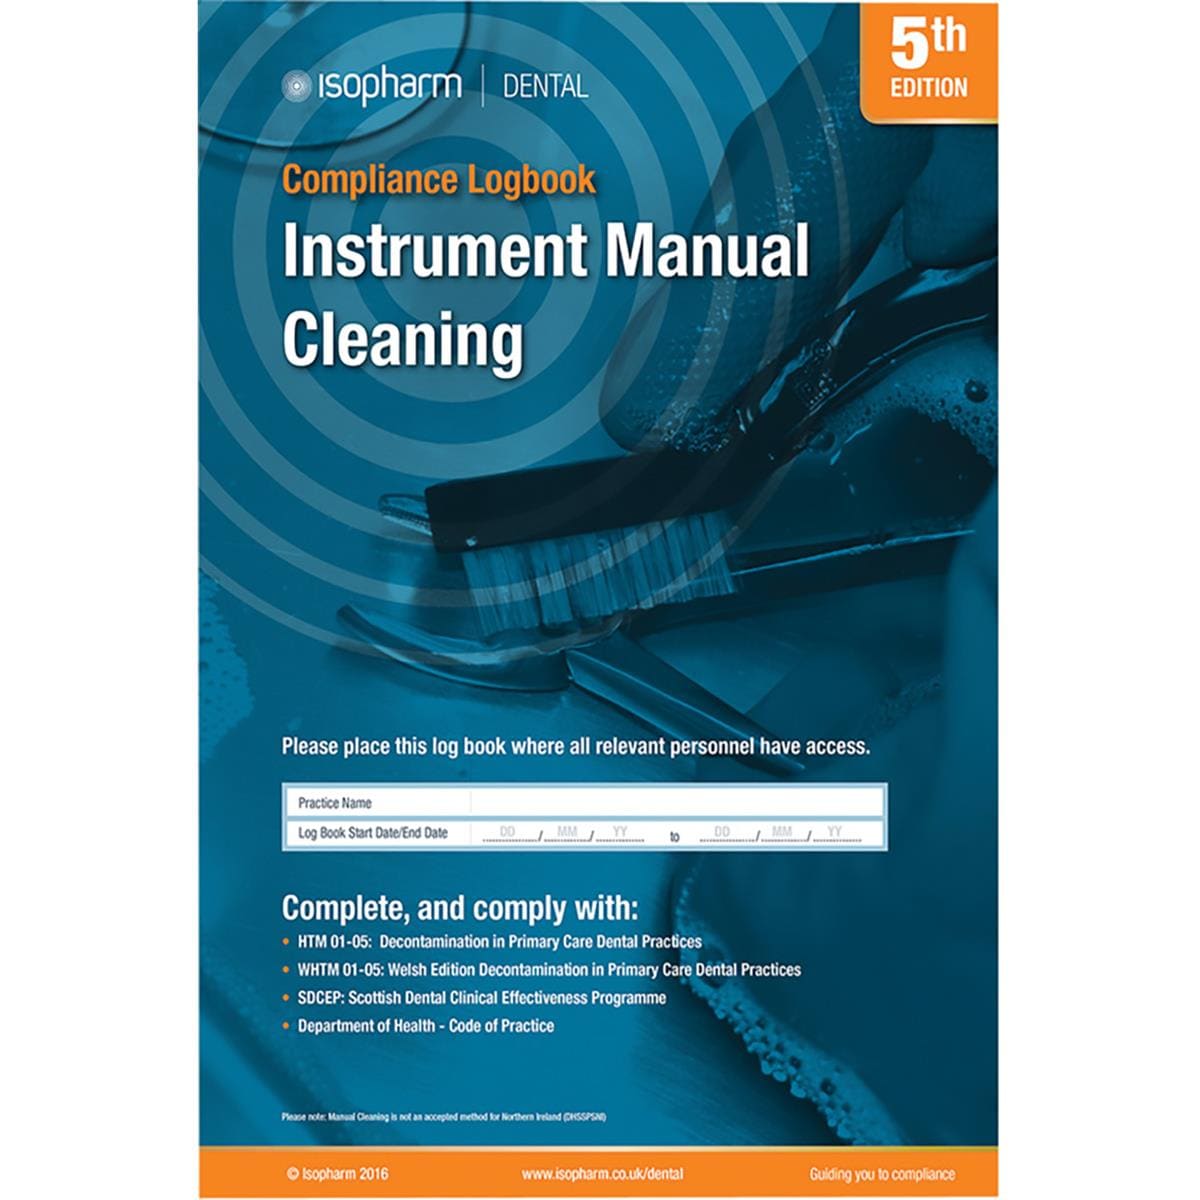 Manual Cleaning Compliance Logbook